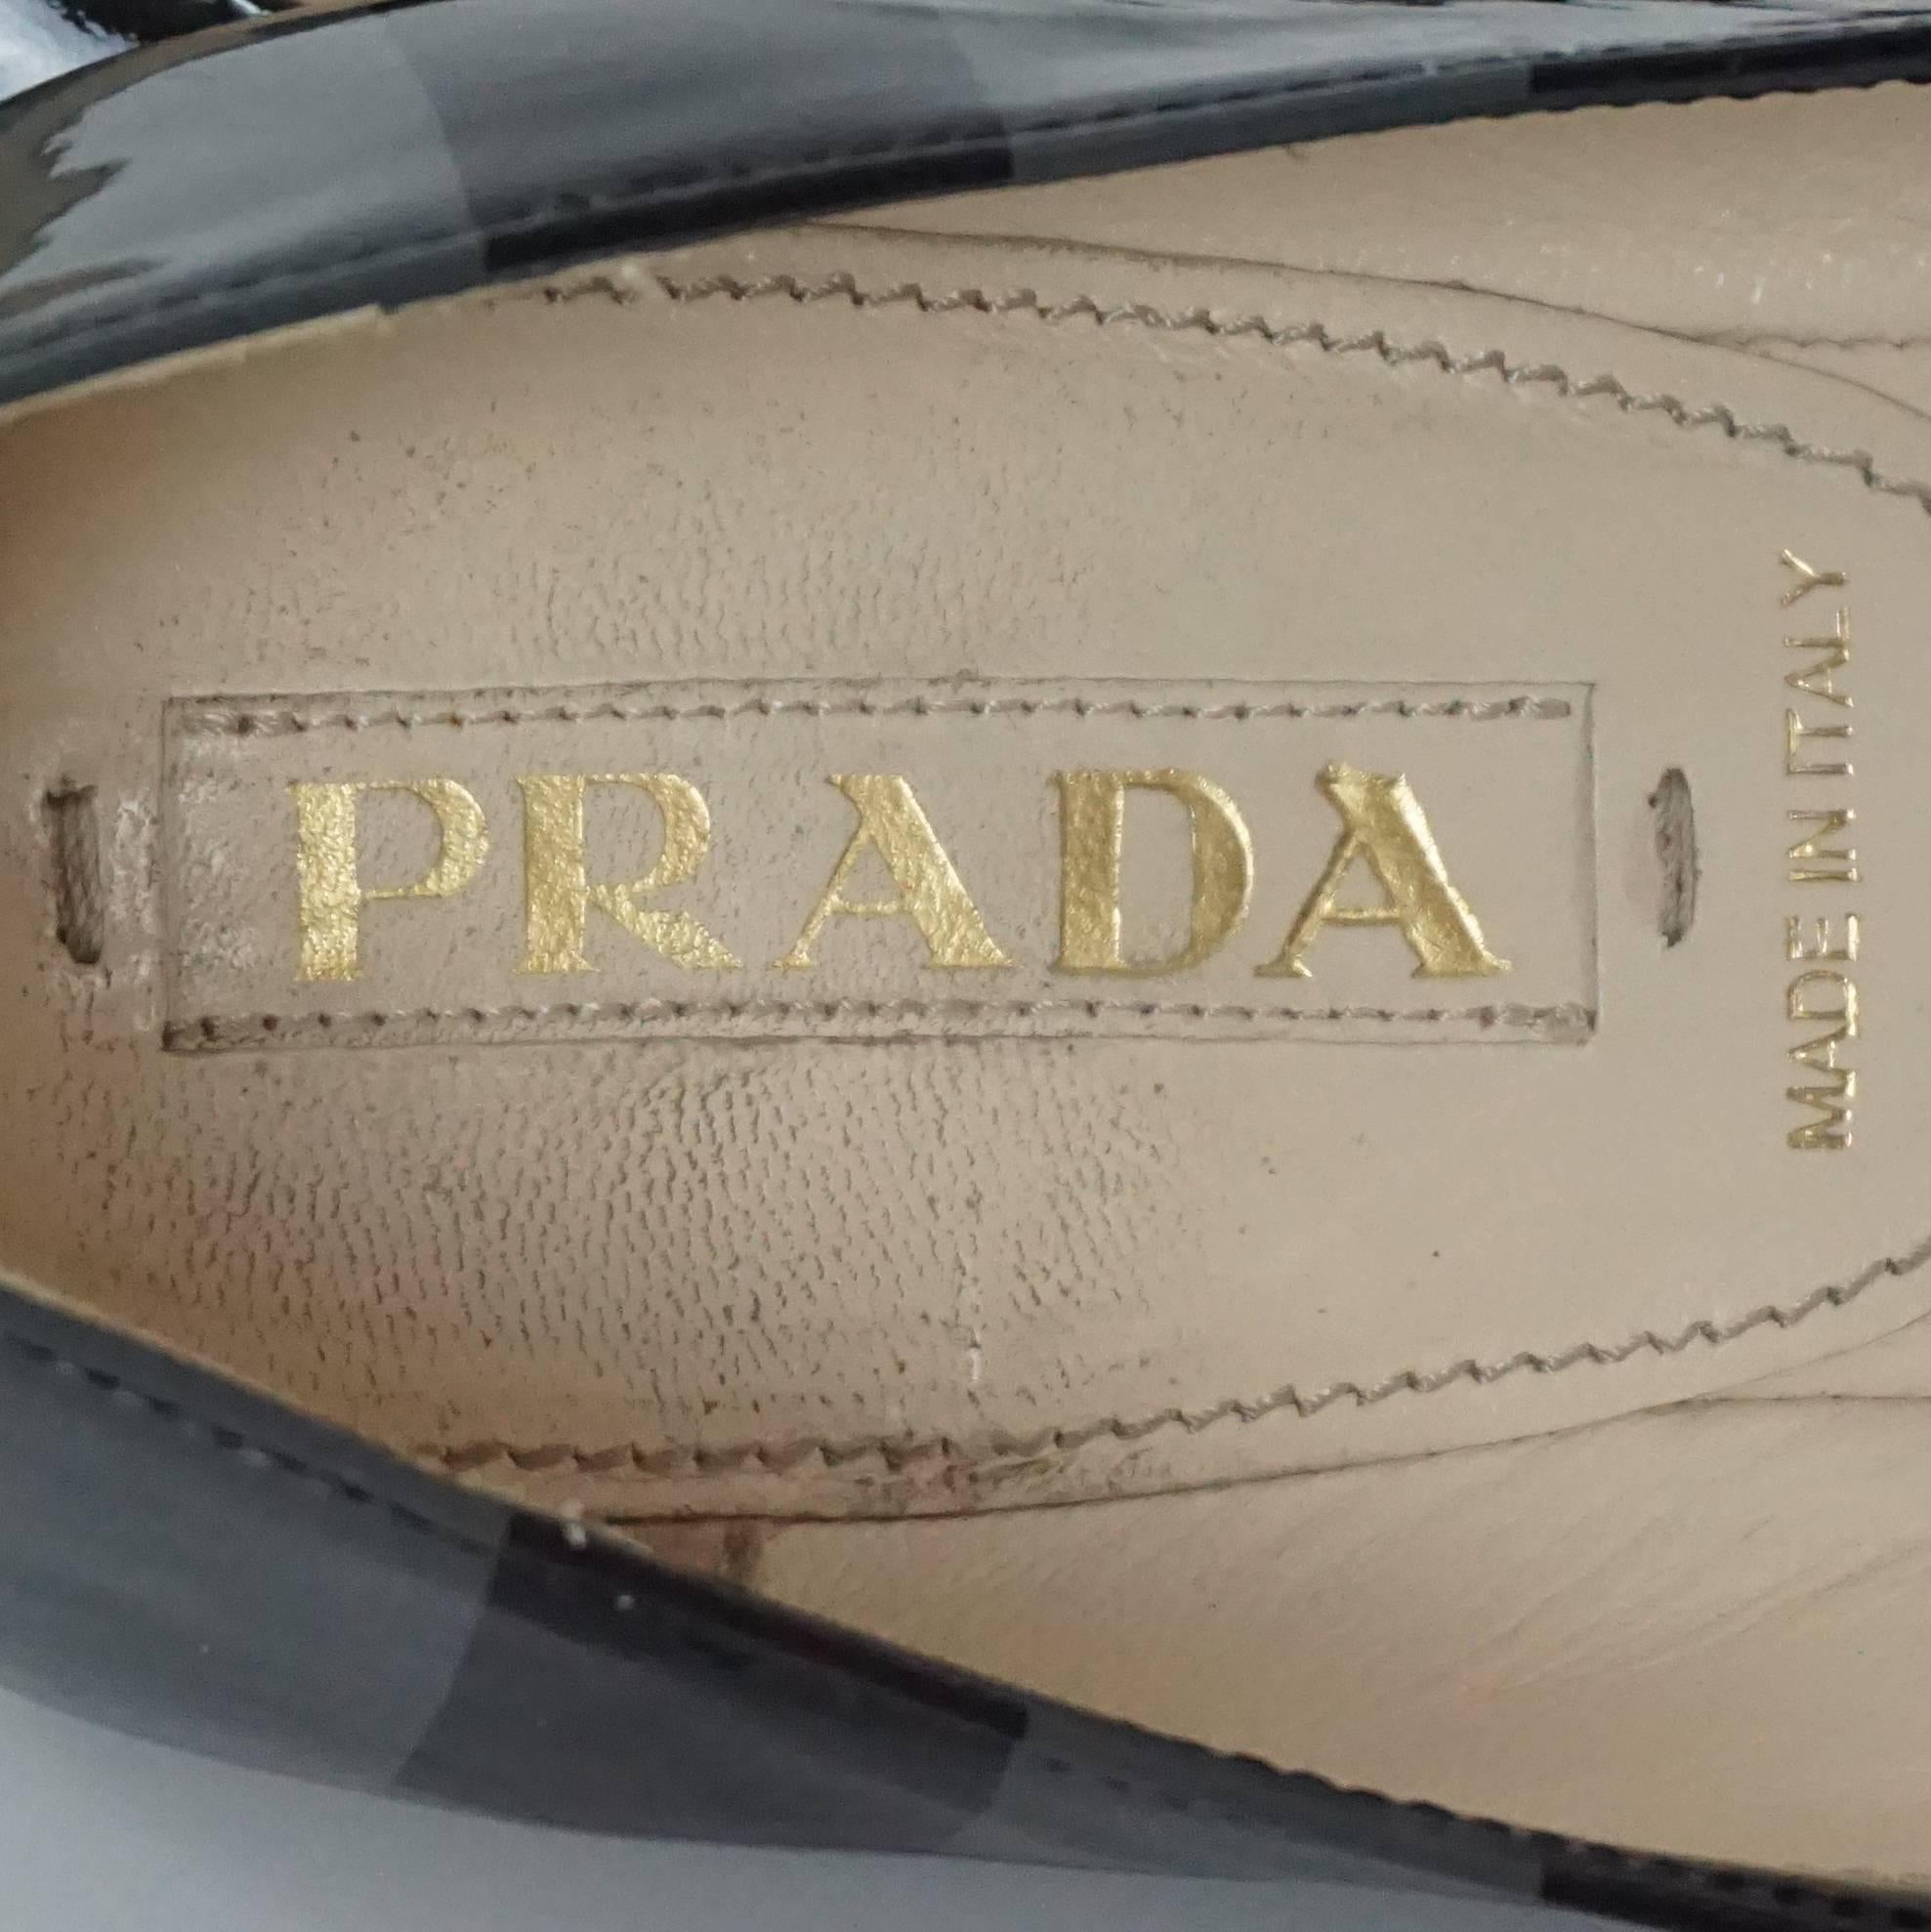 Prada Black and Gray Patent Striped Flats with Bow - 36 2